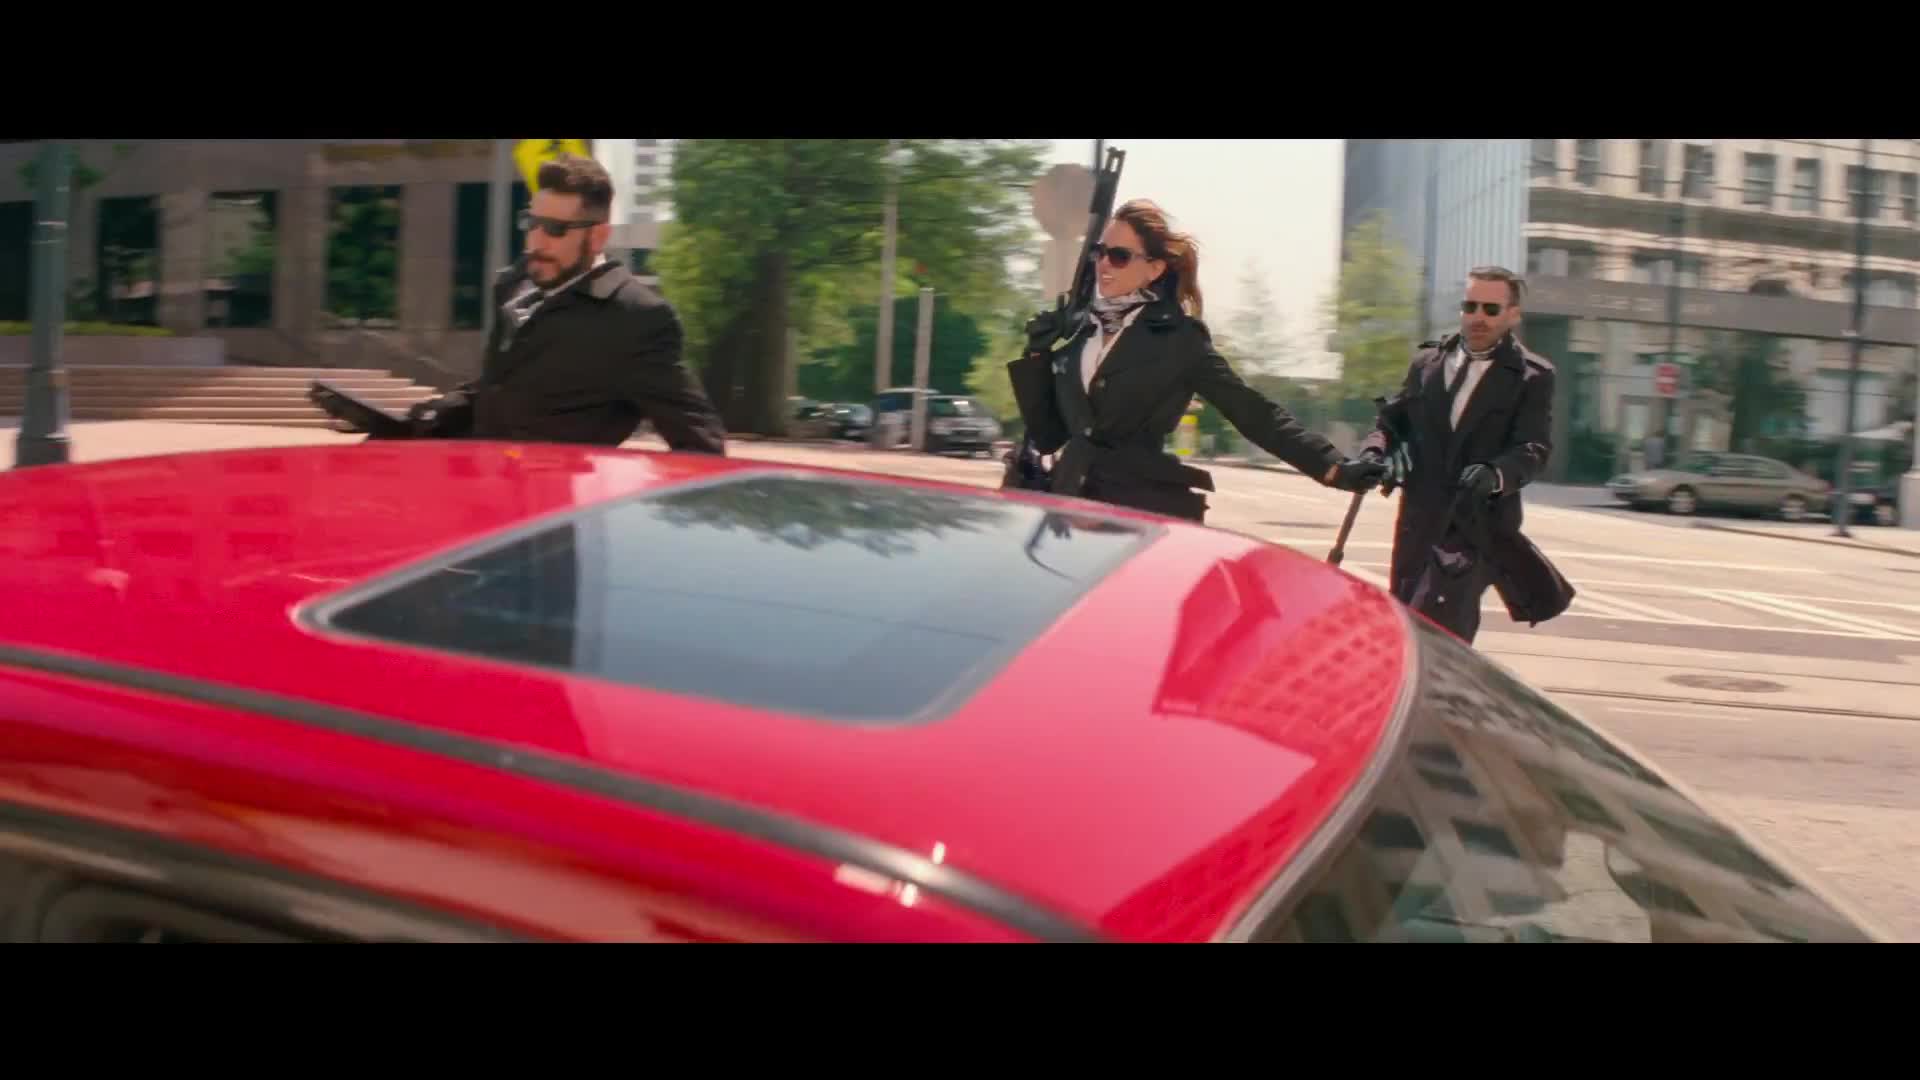 BABY DRIVER - Official International Trailer